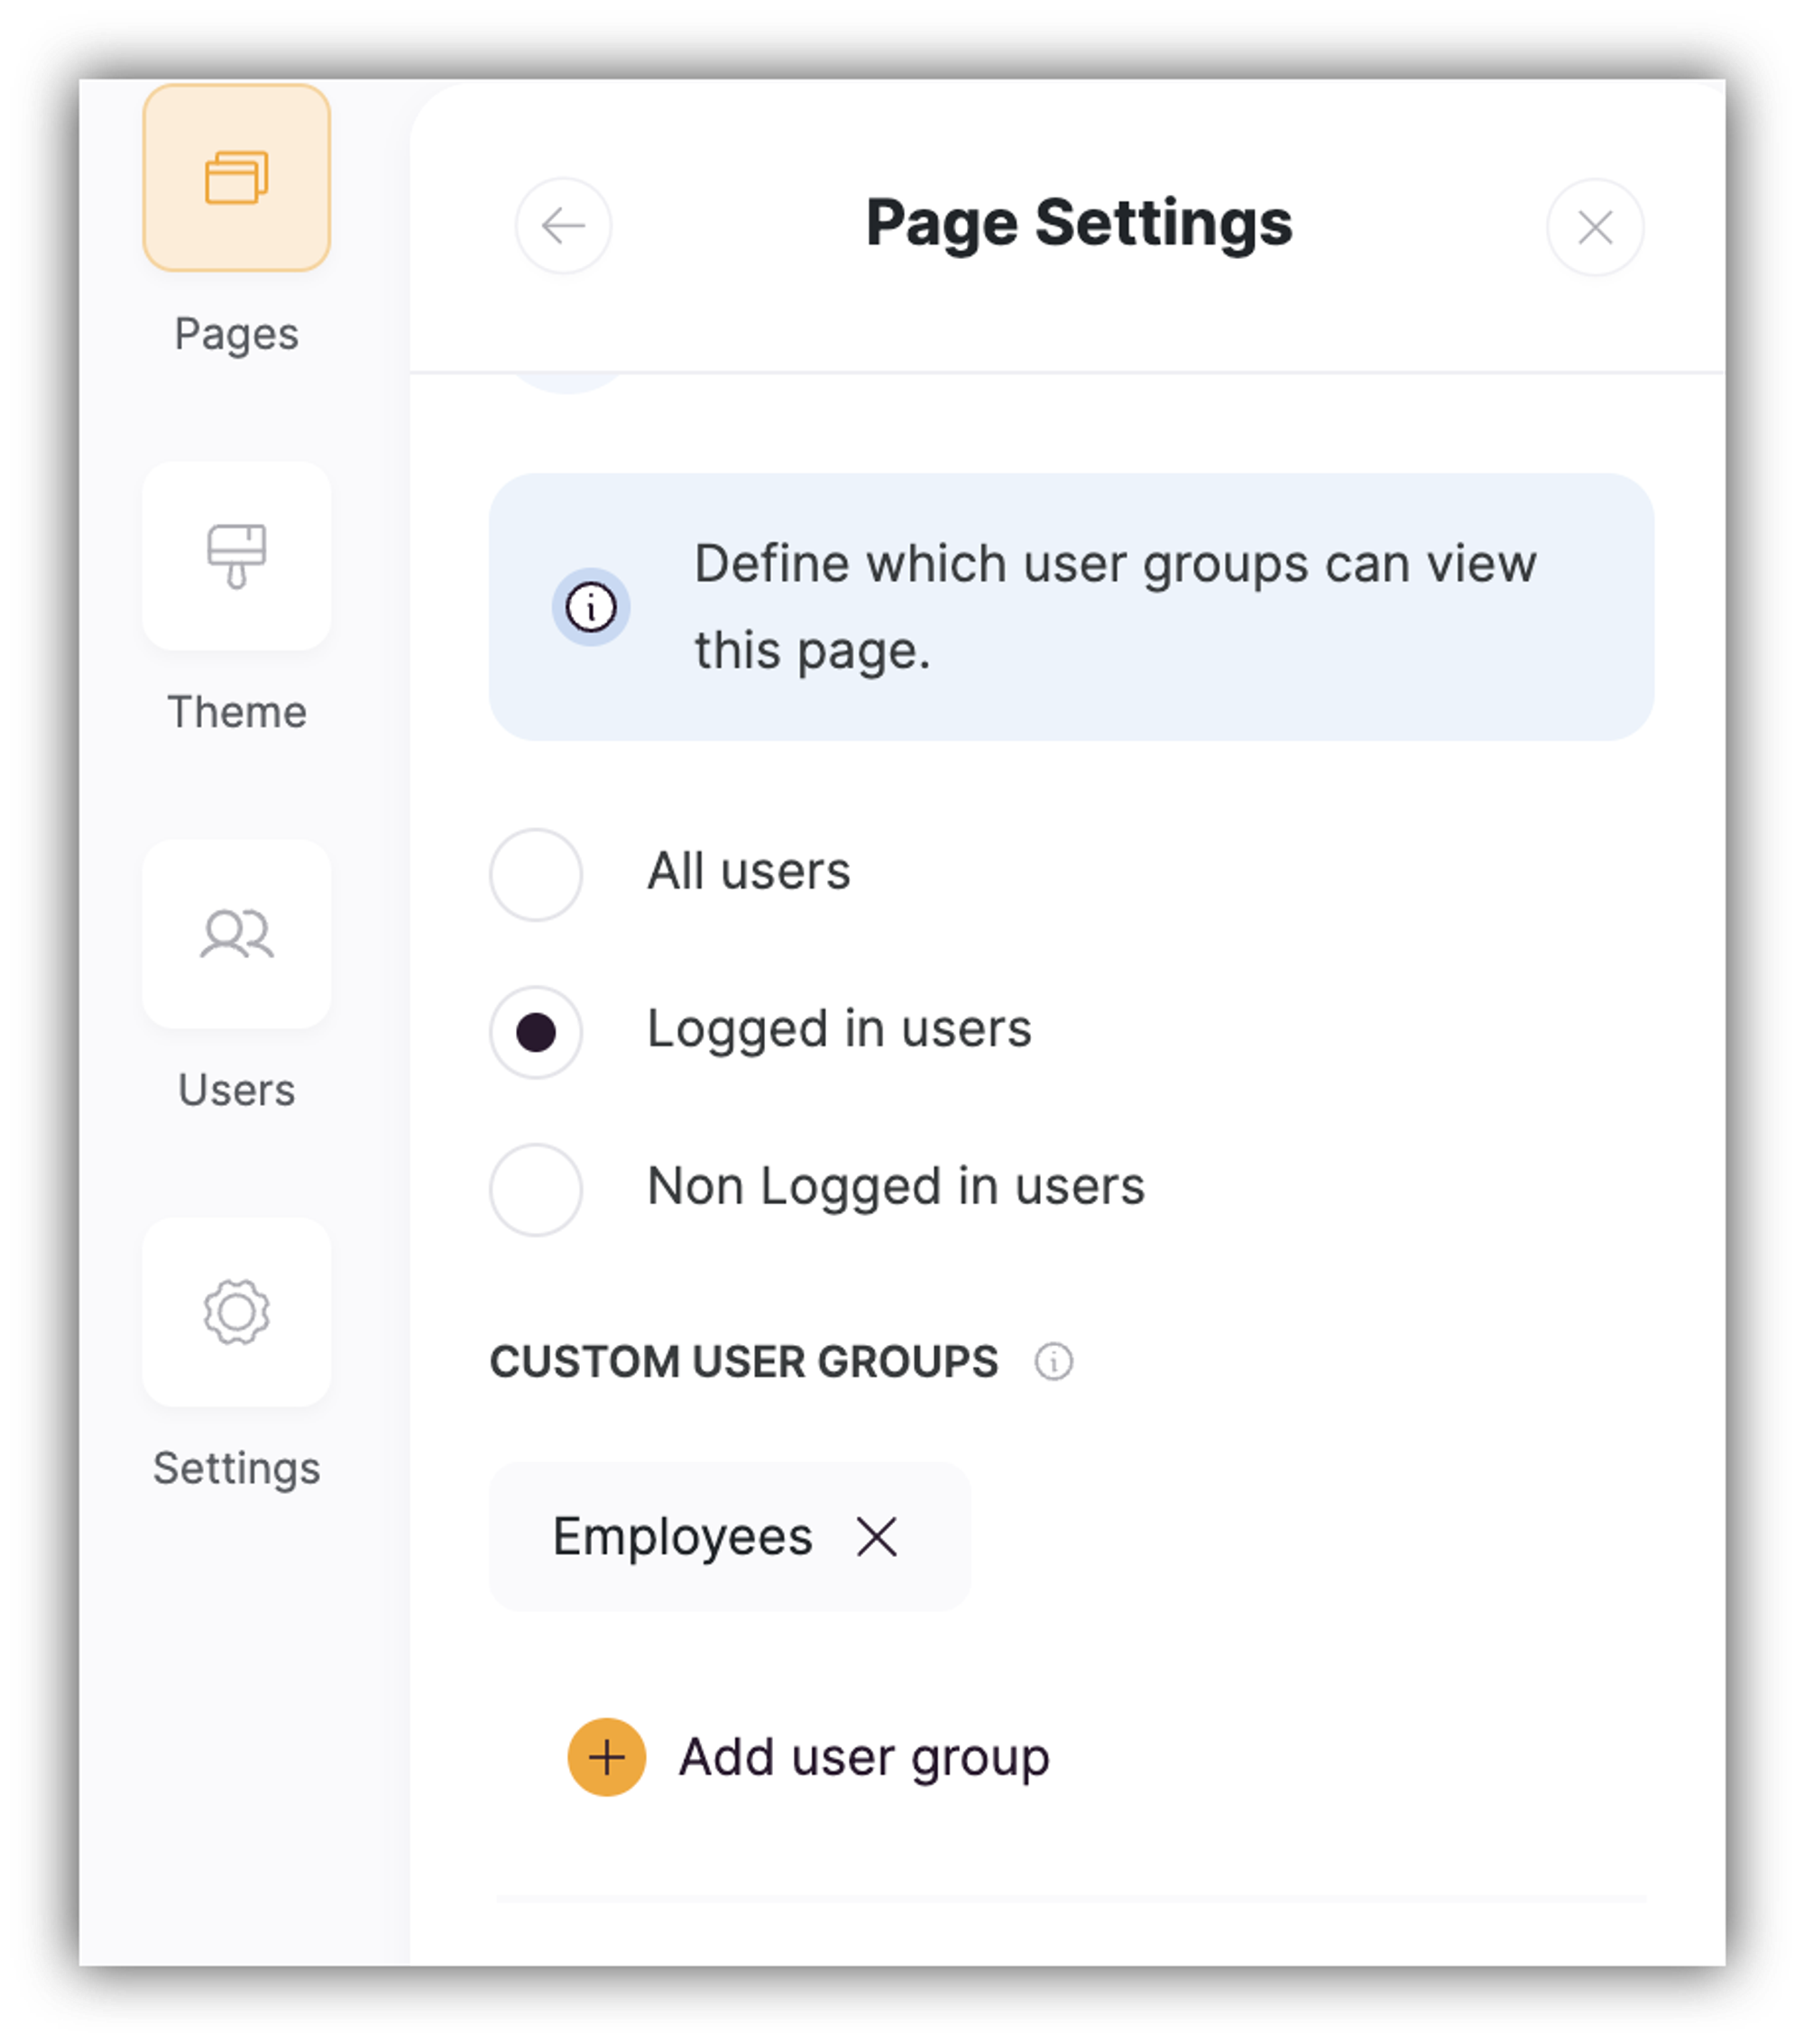 Adding a user group to a page